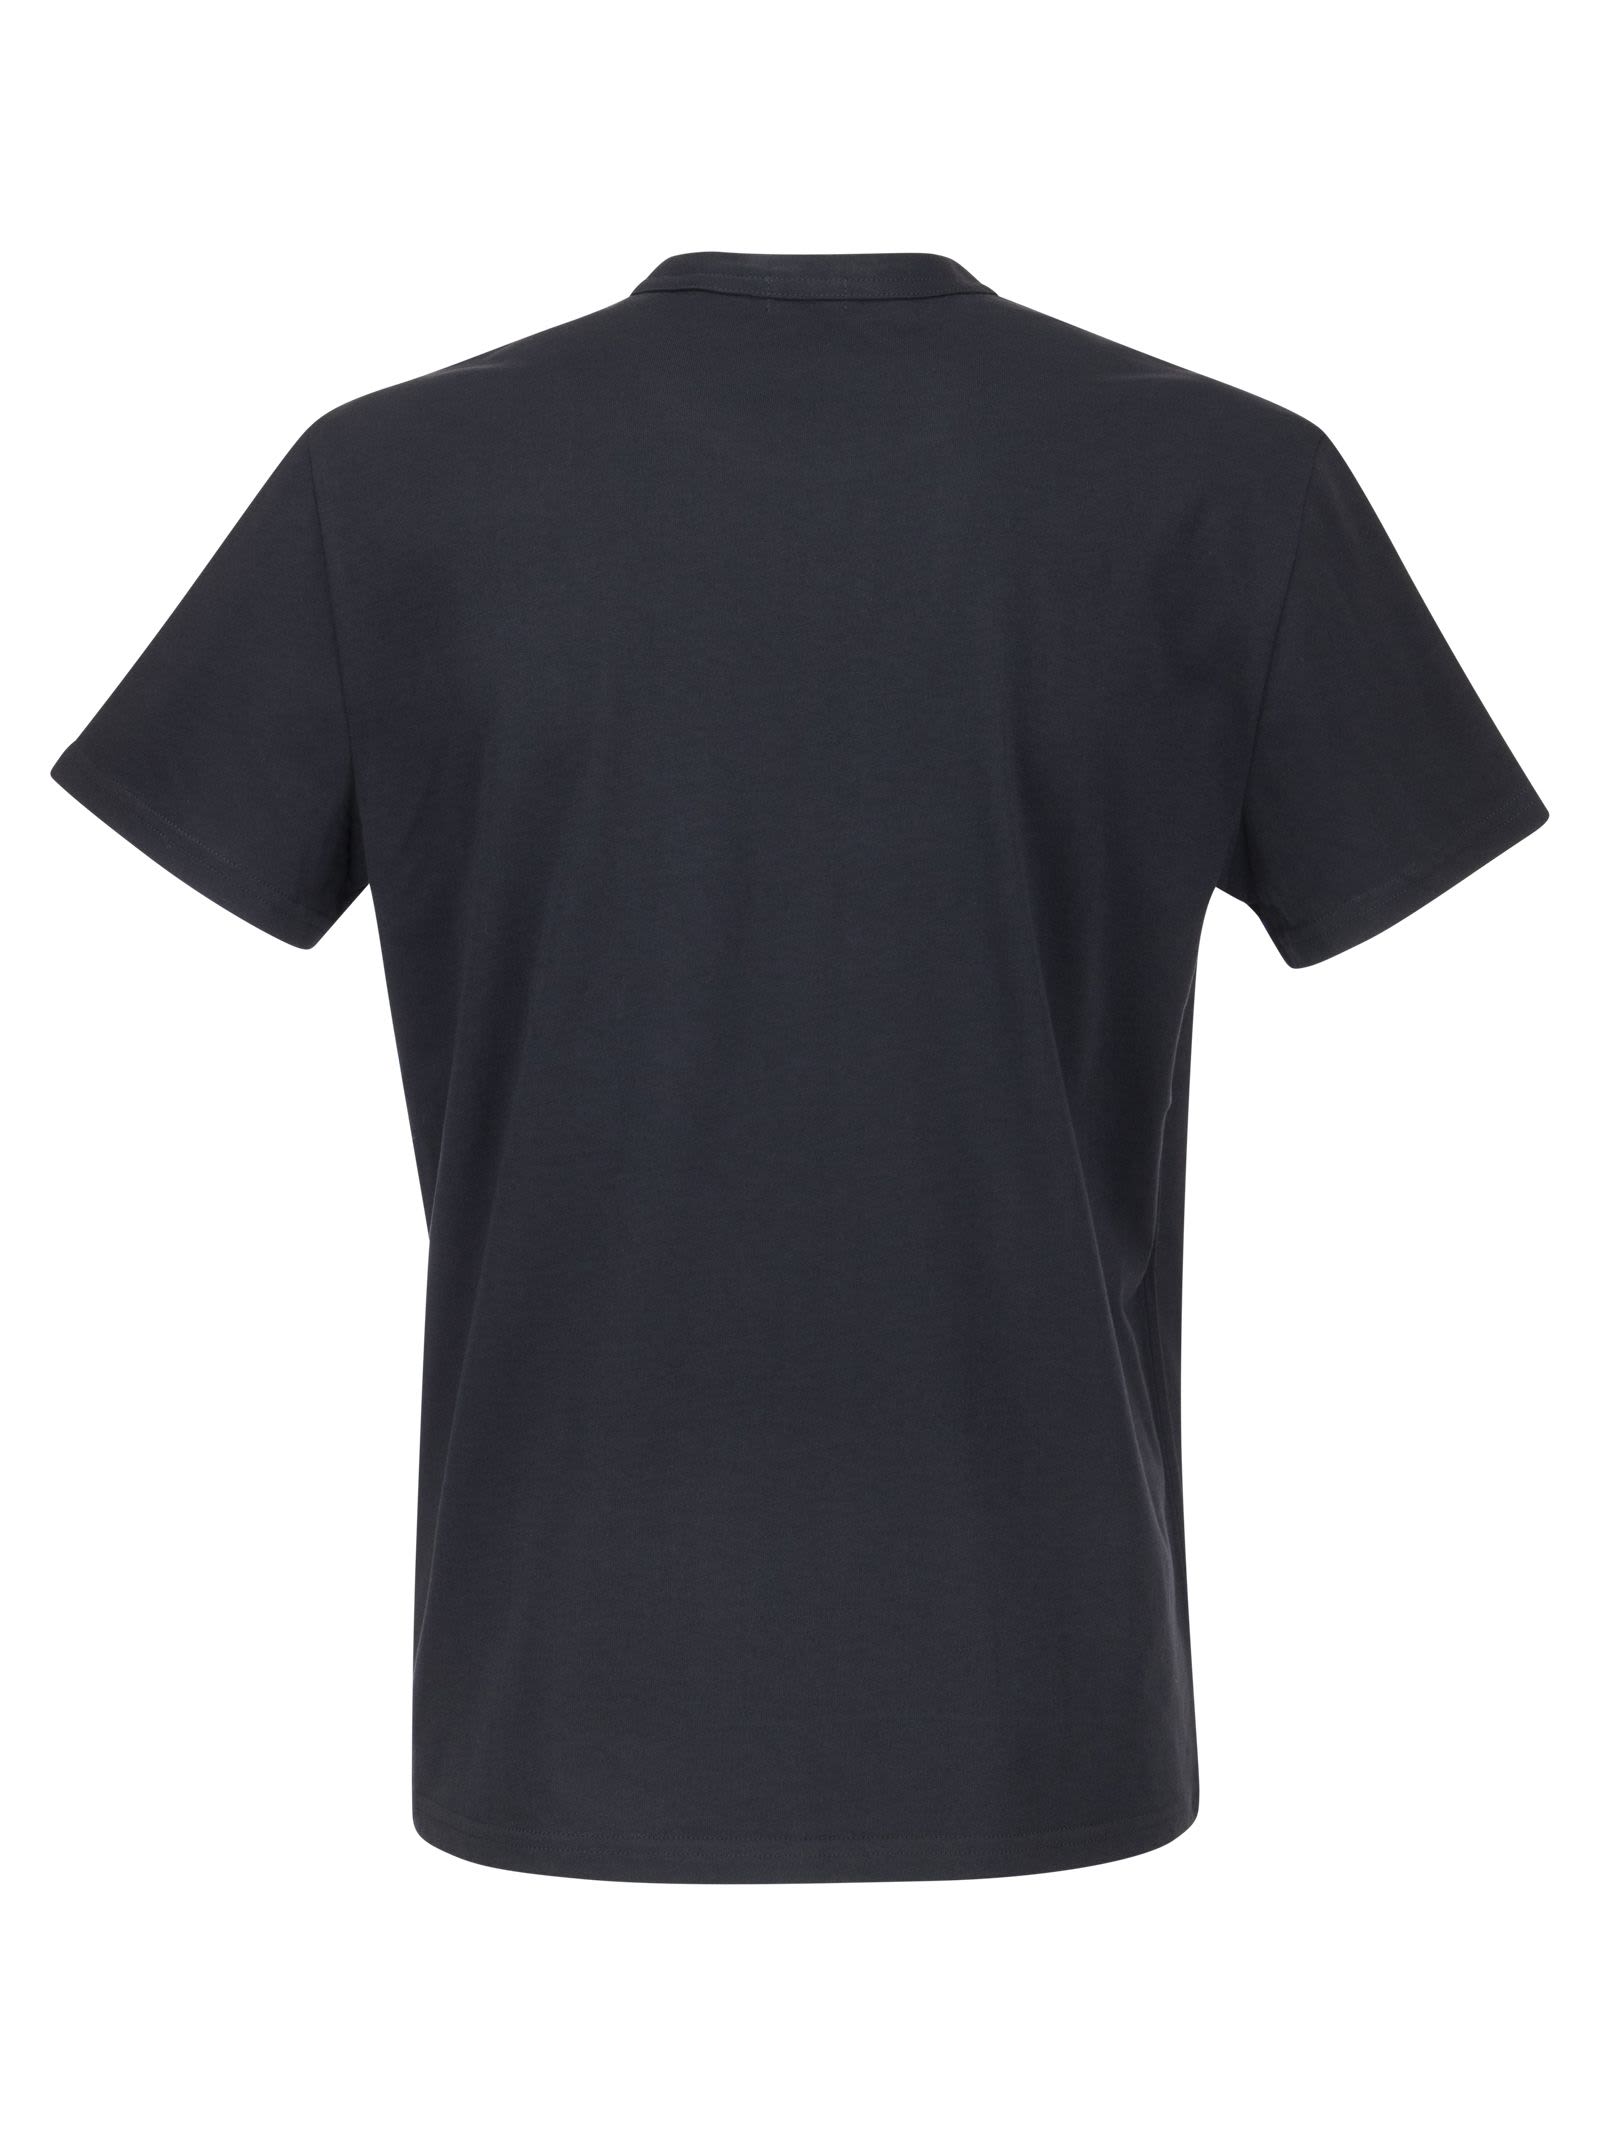 Shop Fay Archive T-shirt In Navy Blue